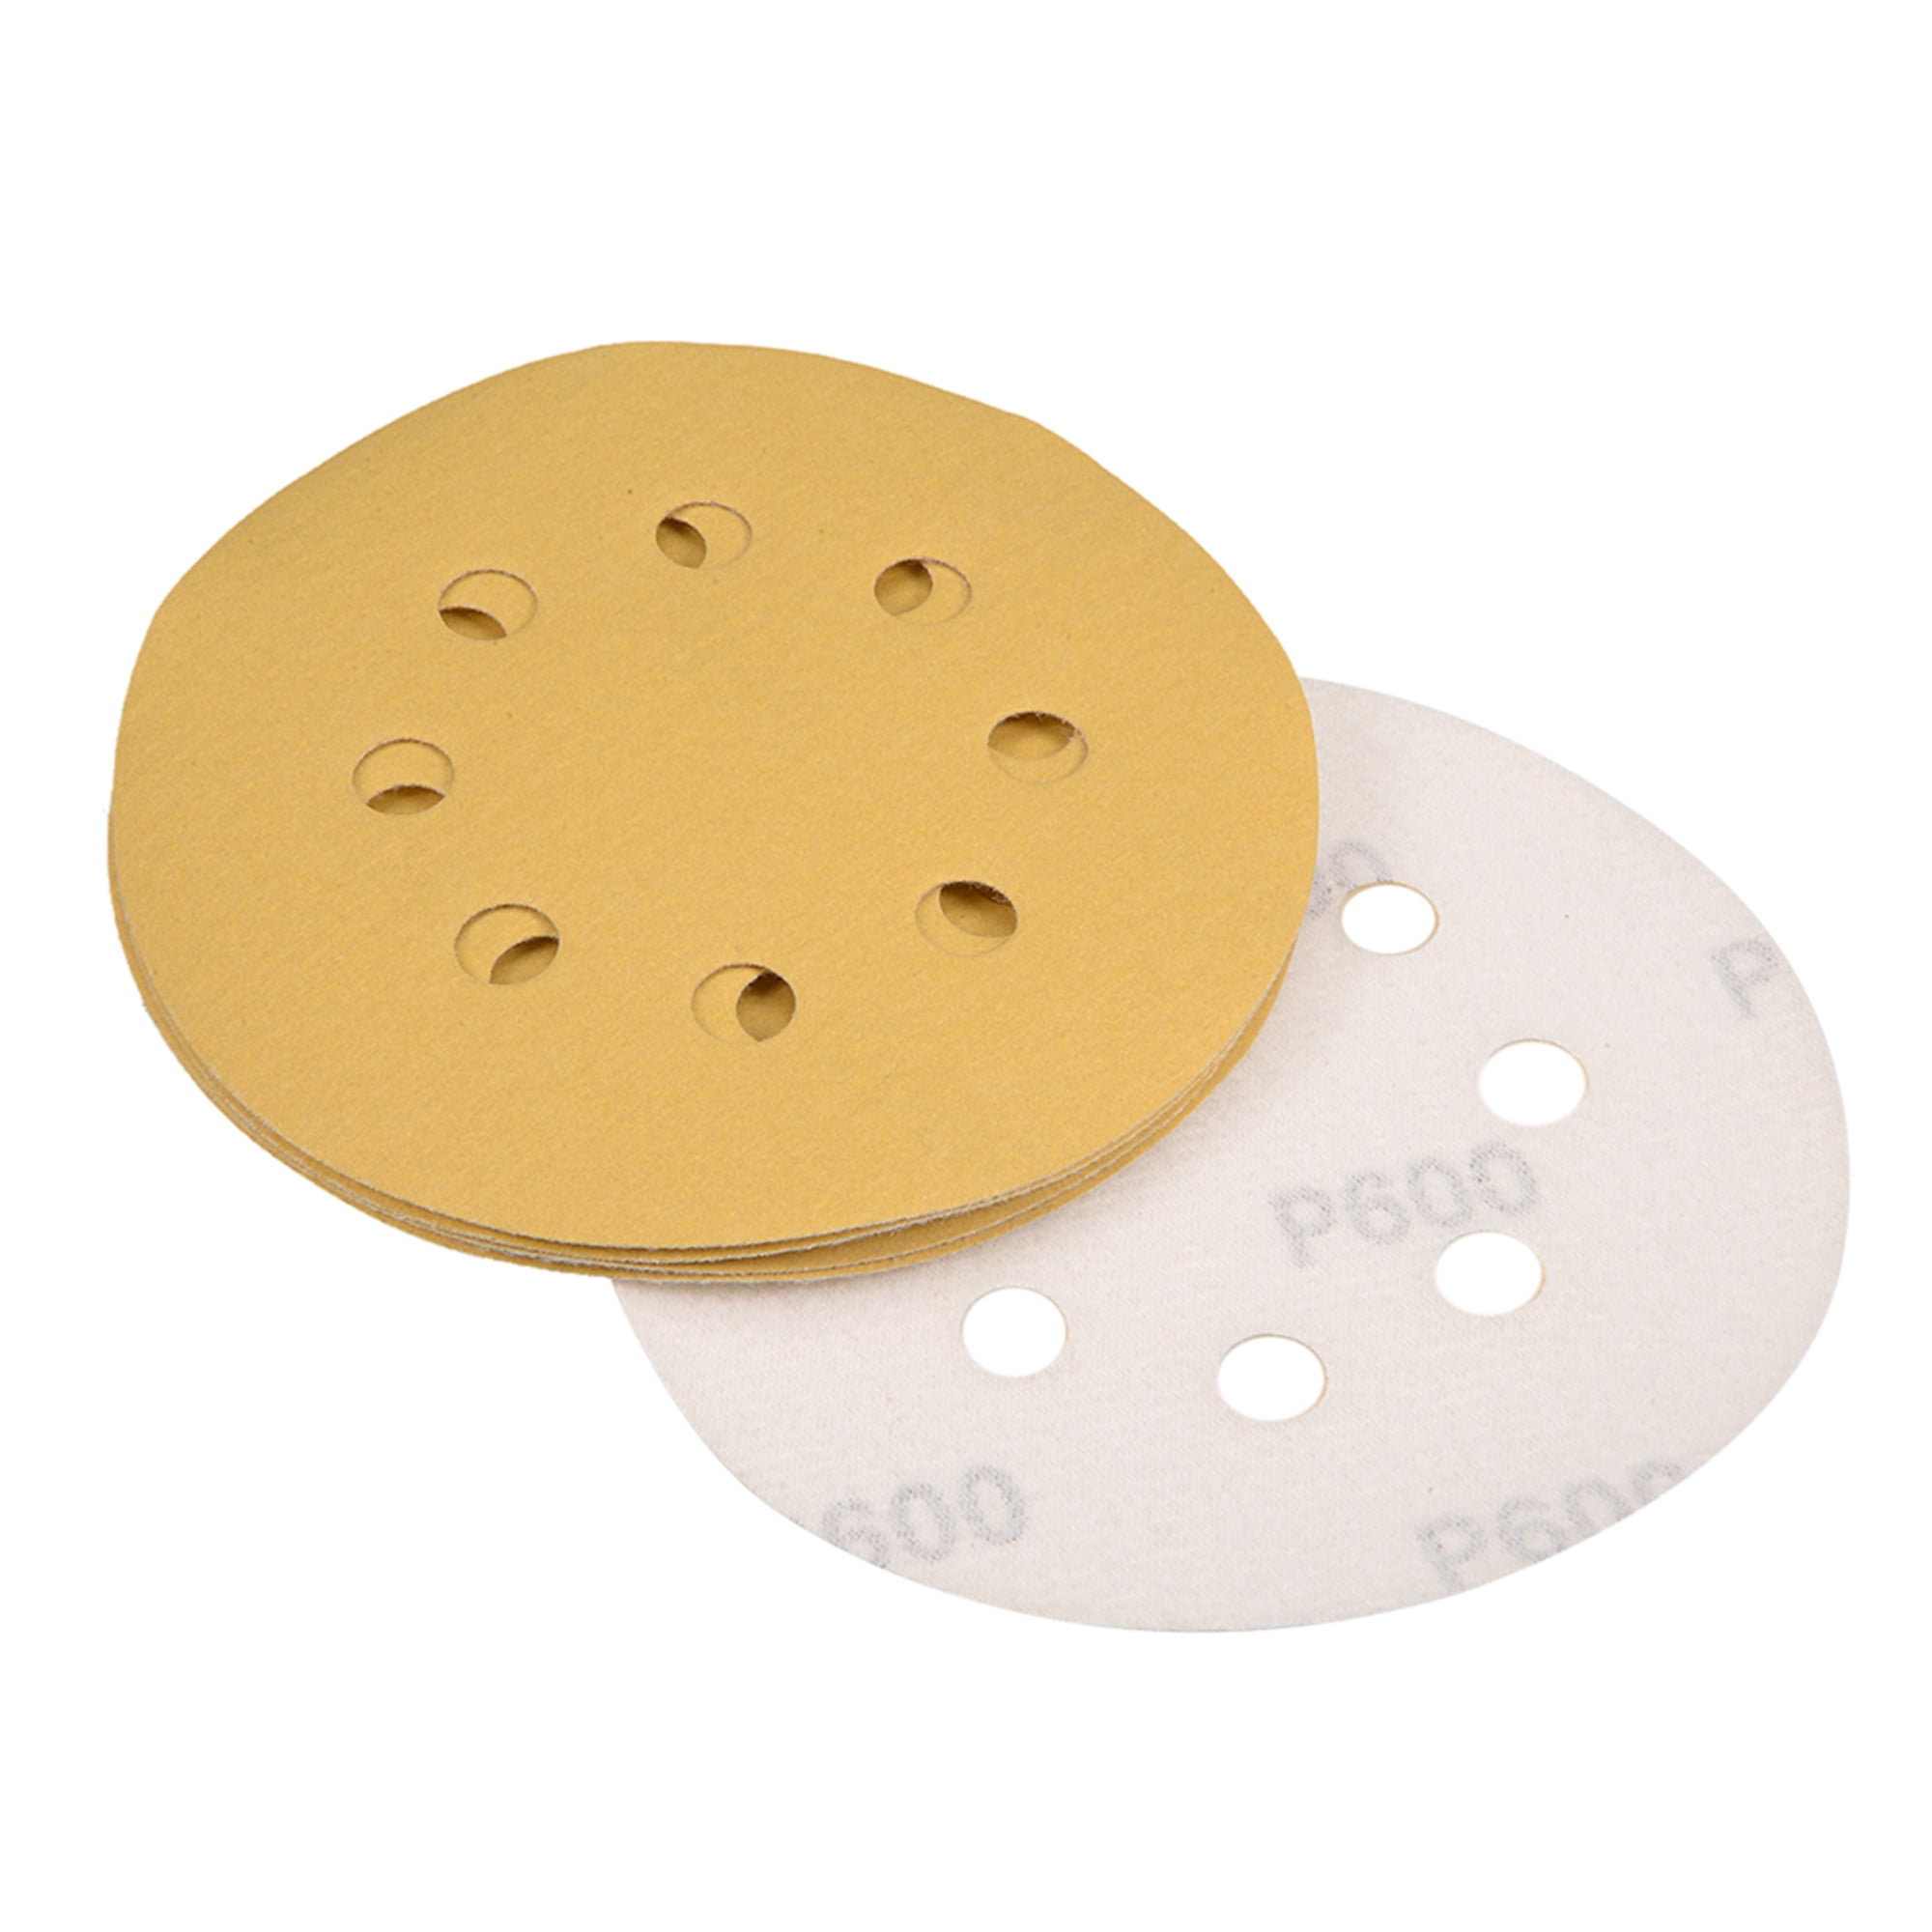 60-1000 Grit Sanding Discs 10Pcs 5inch 8 Hole Low Consumption High Wear Resisting Degree Round Shape Grit Papers 120# 